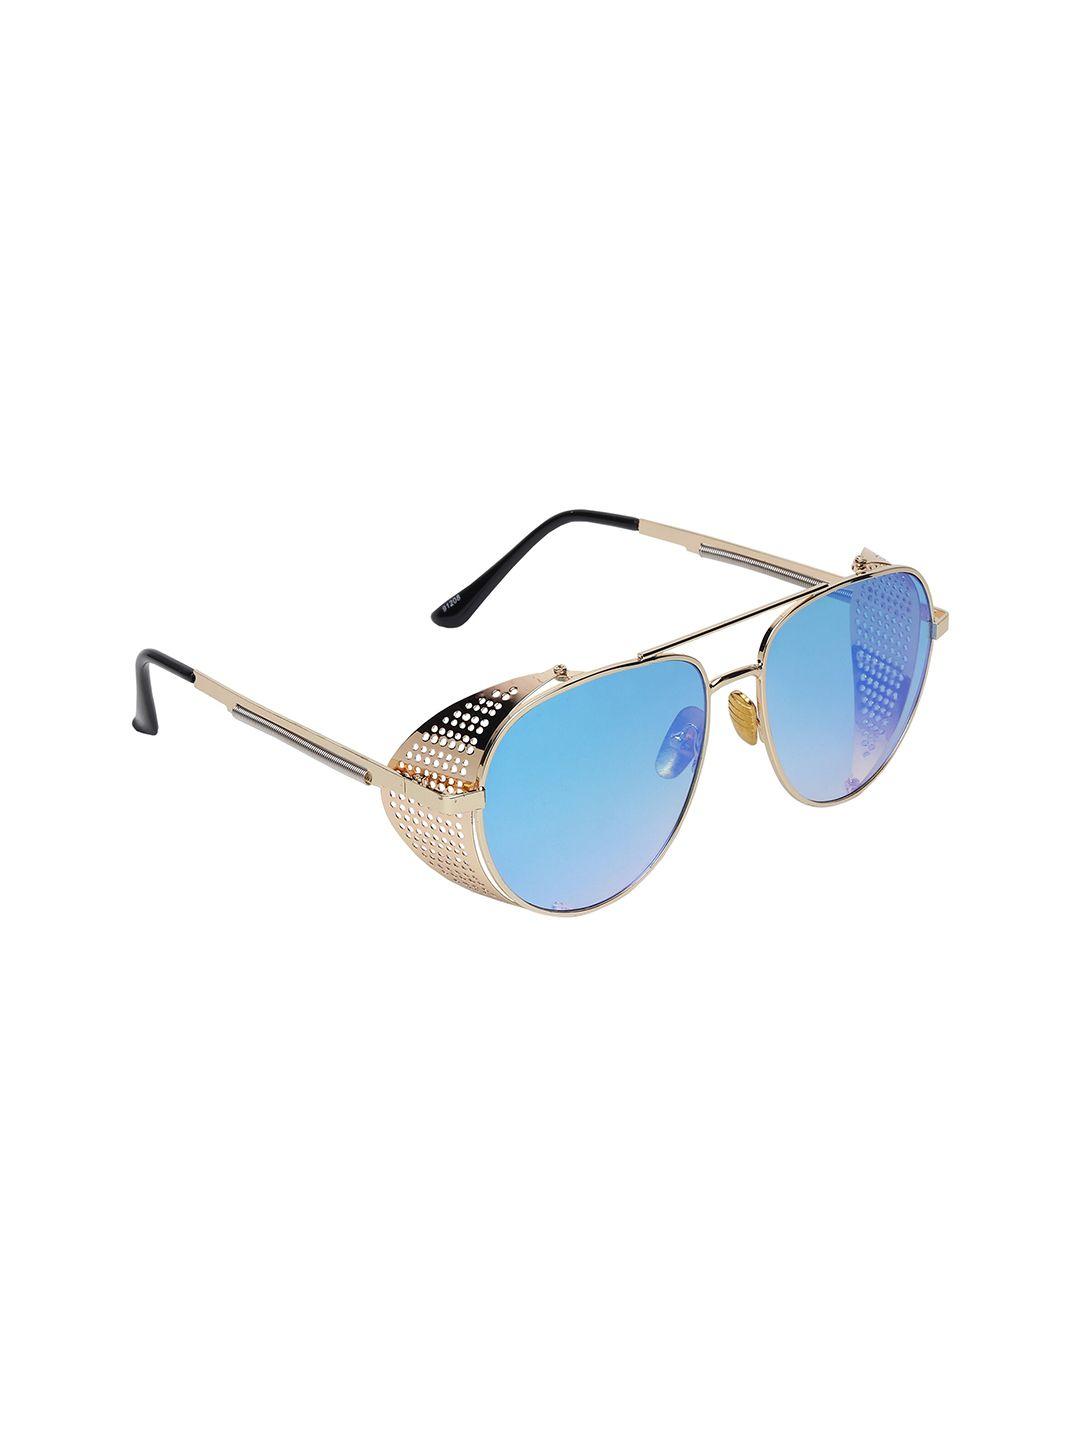 swiss design oval sunglasses with uv protected lens sdsg-91208-05